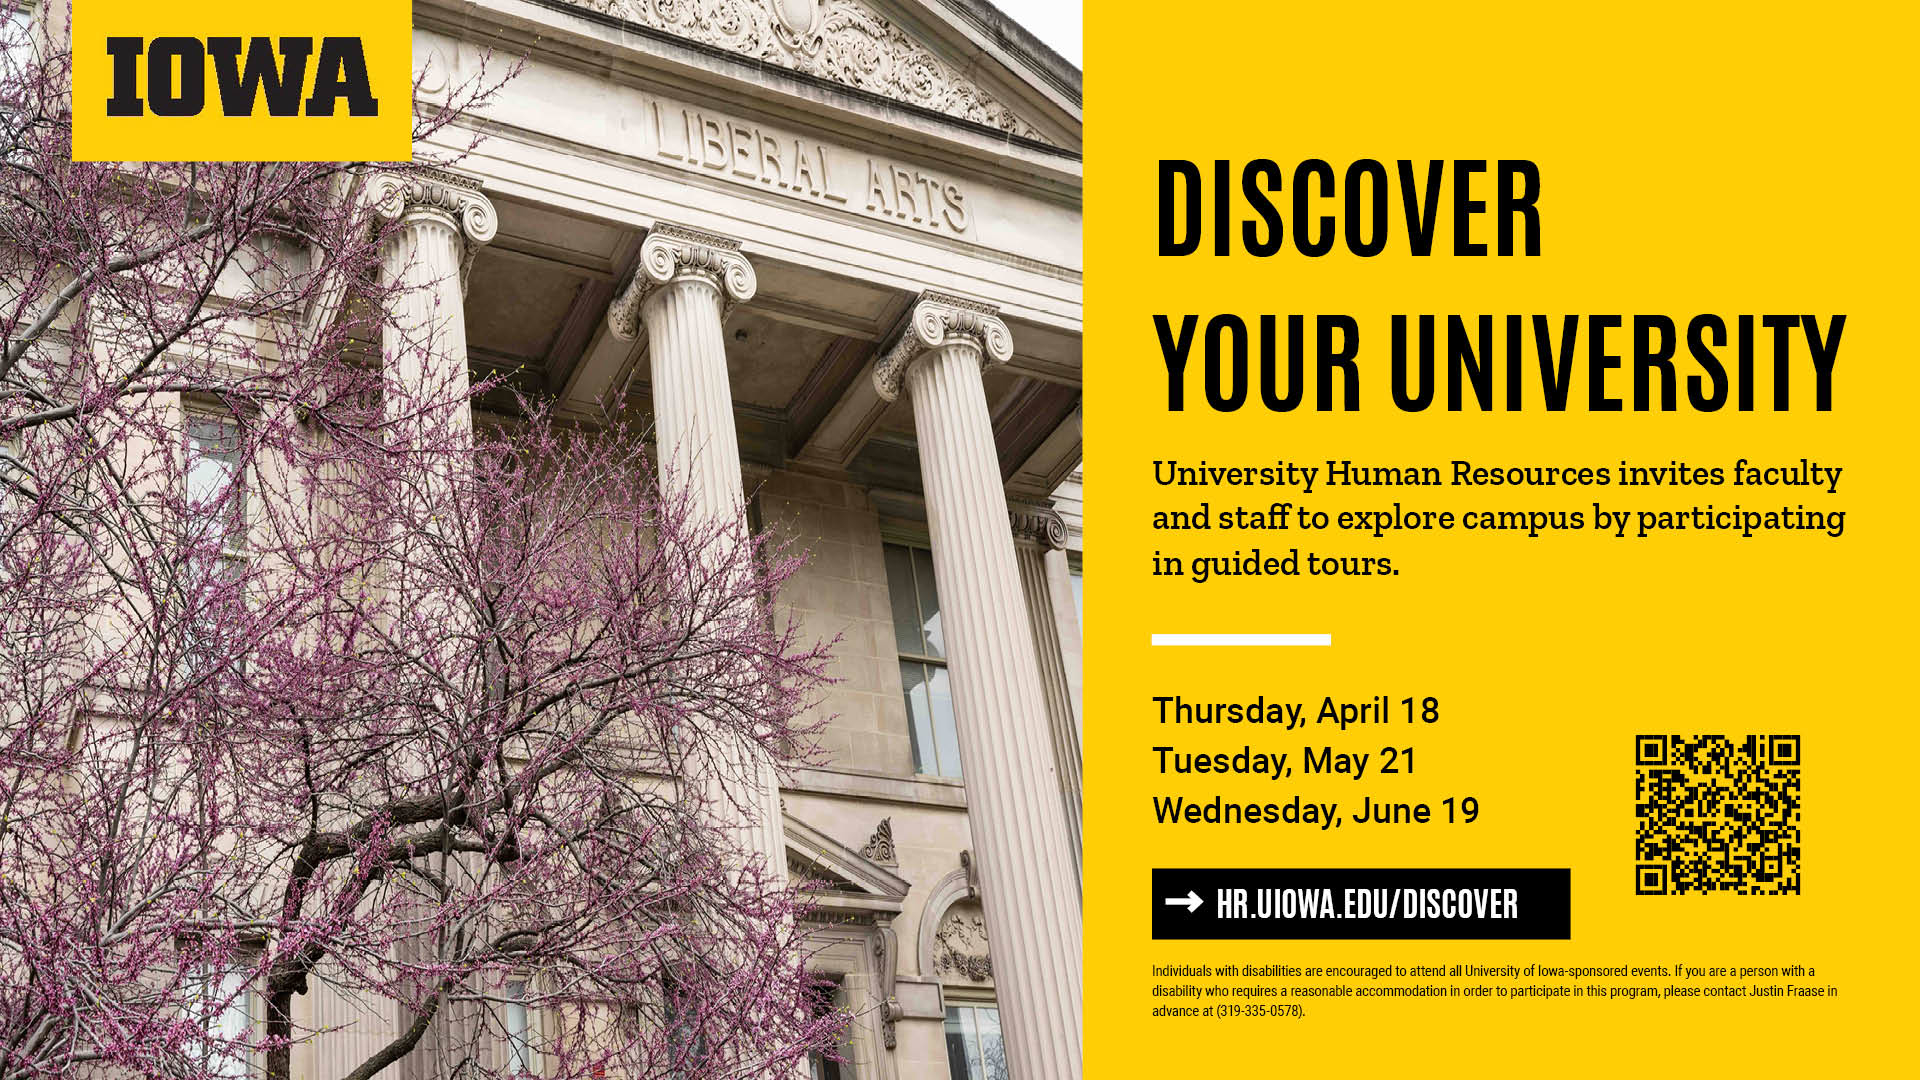 Discover your university events